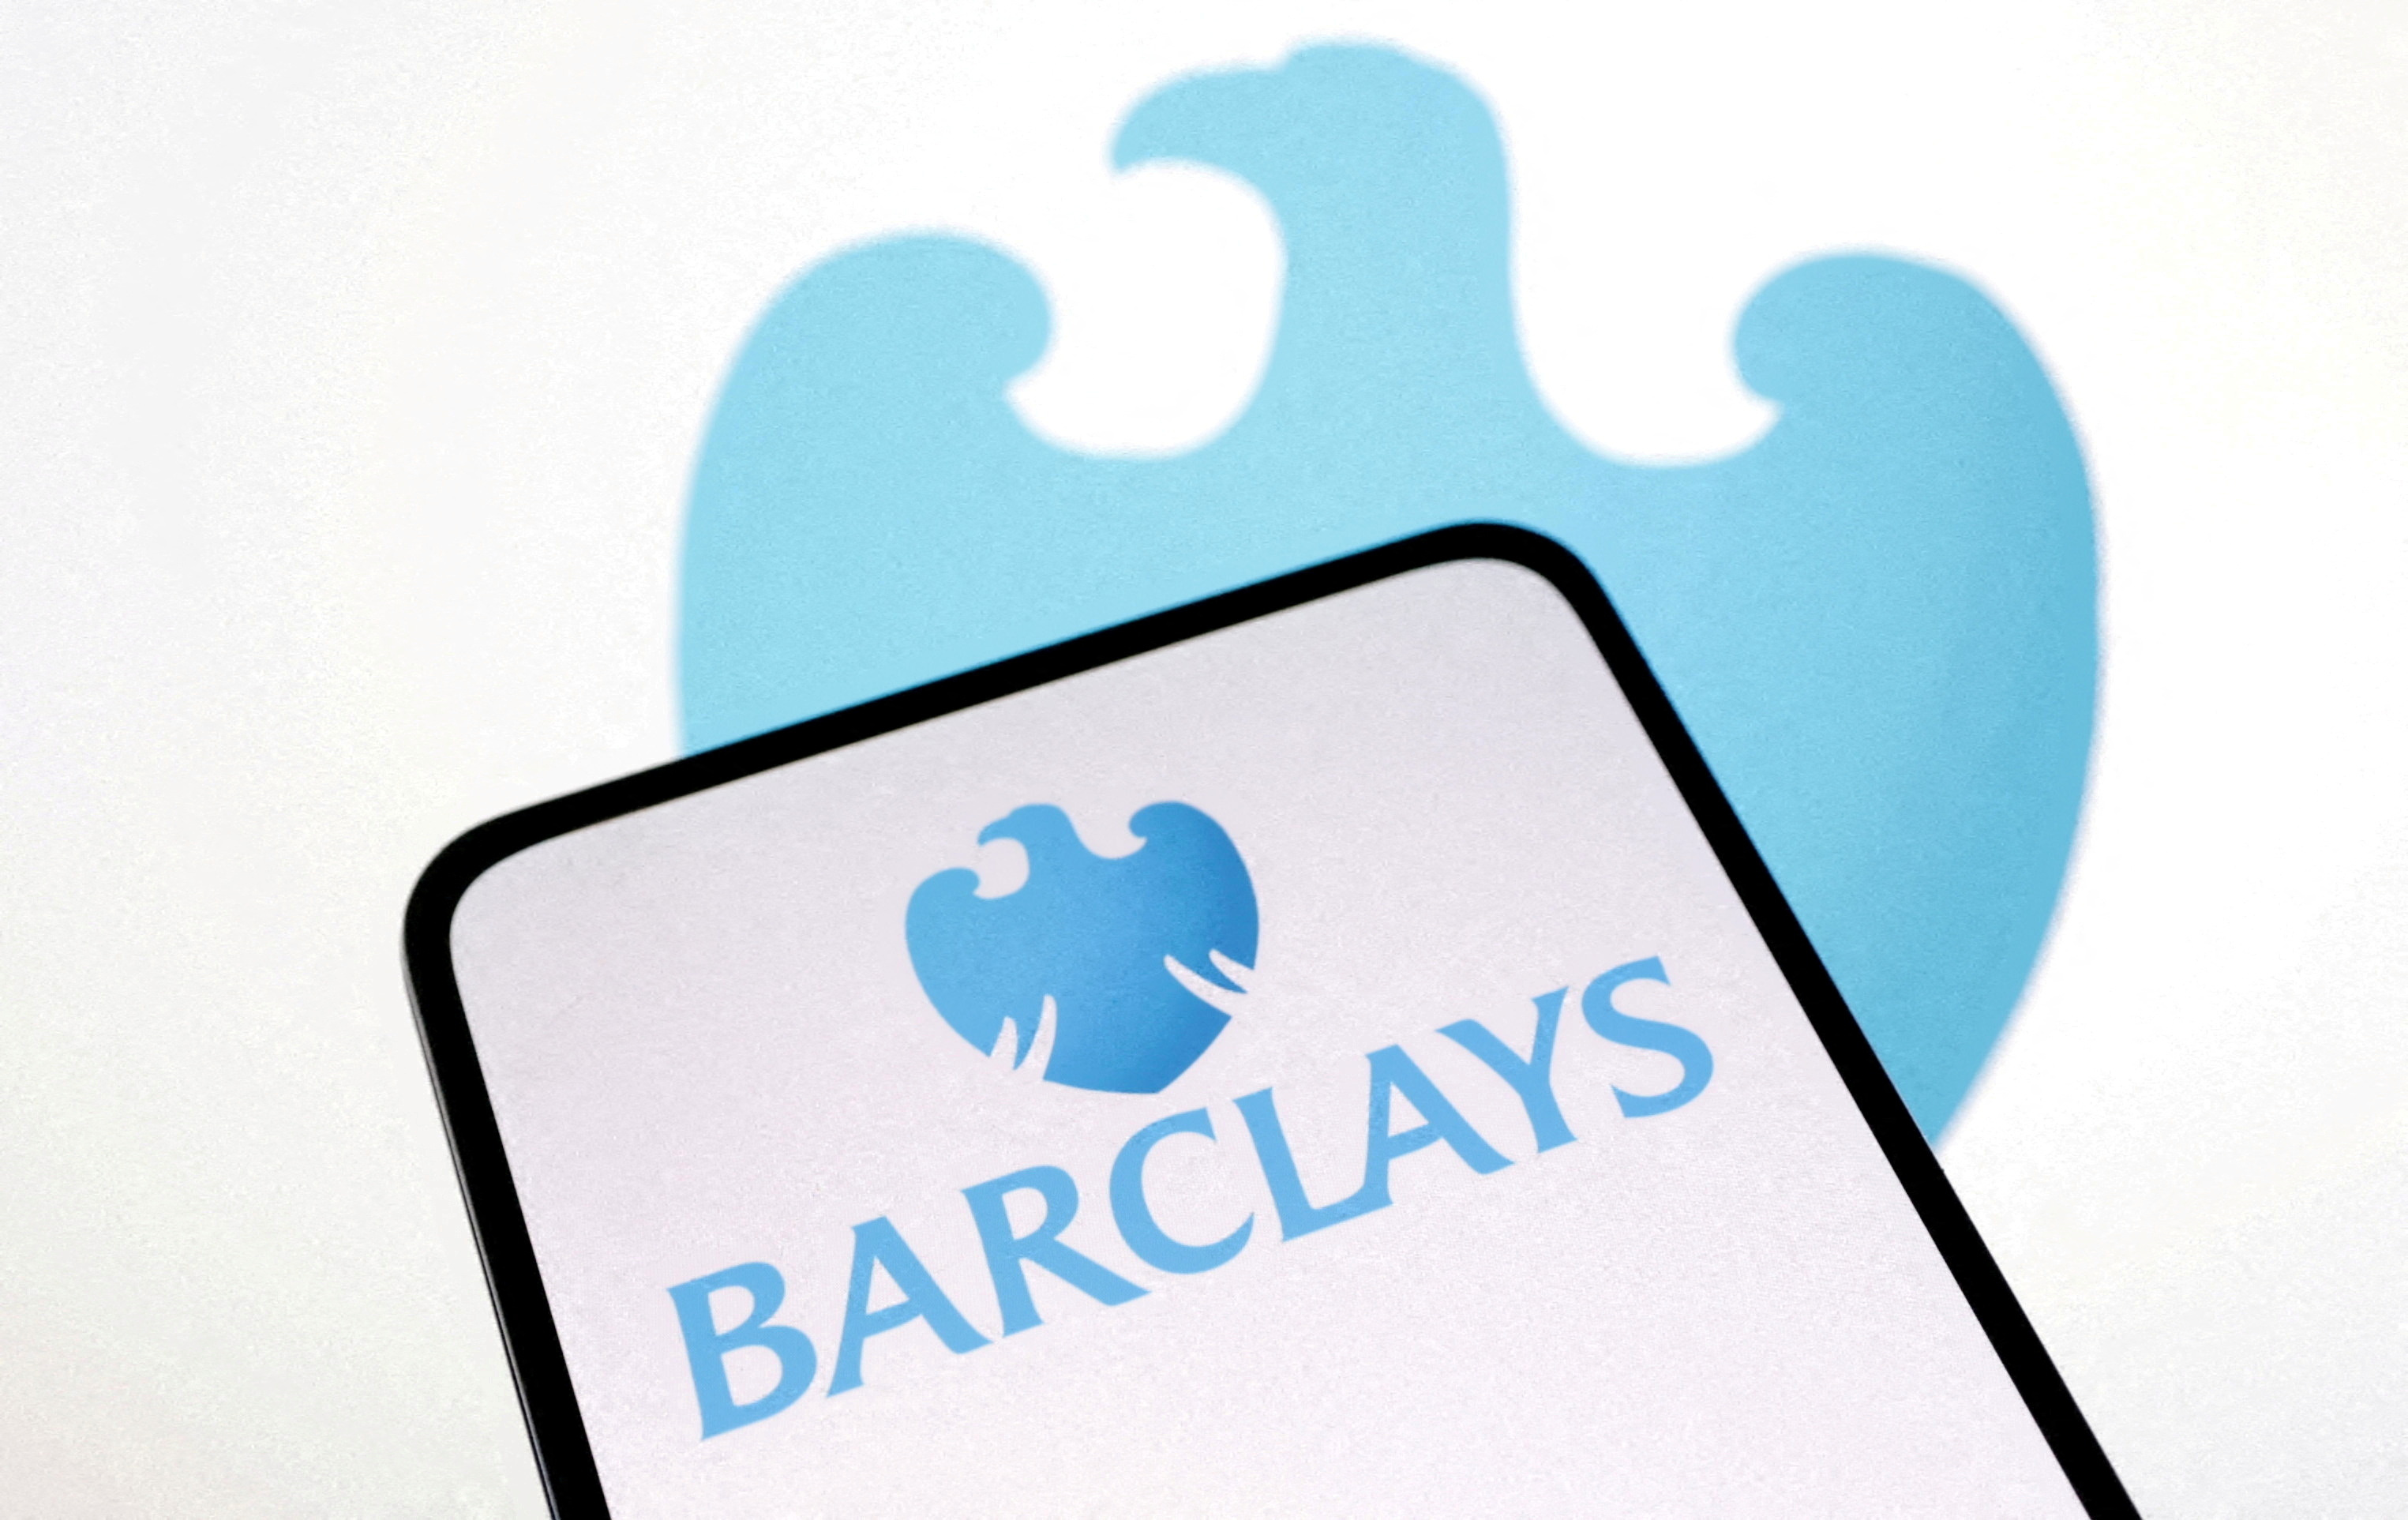 Illustration shows the logo of Barclays bank